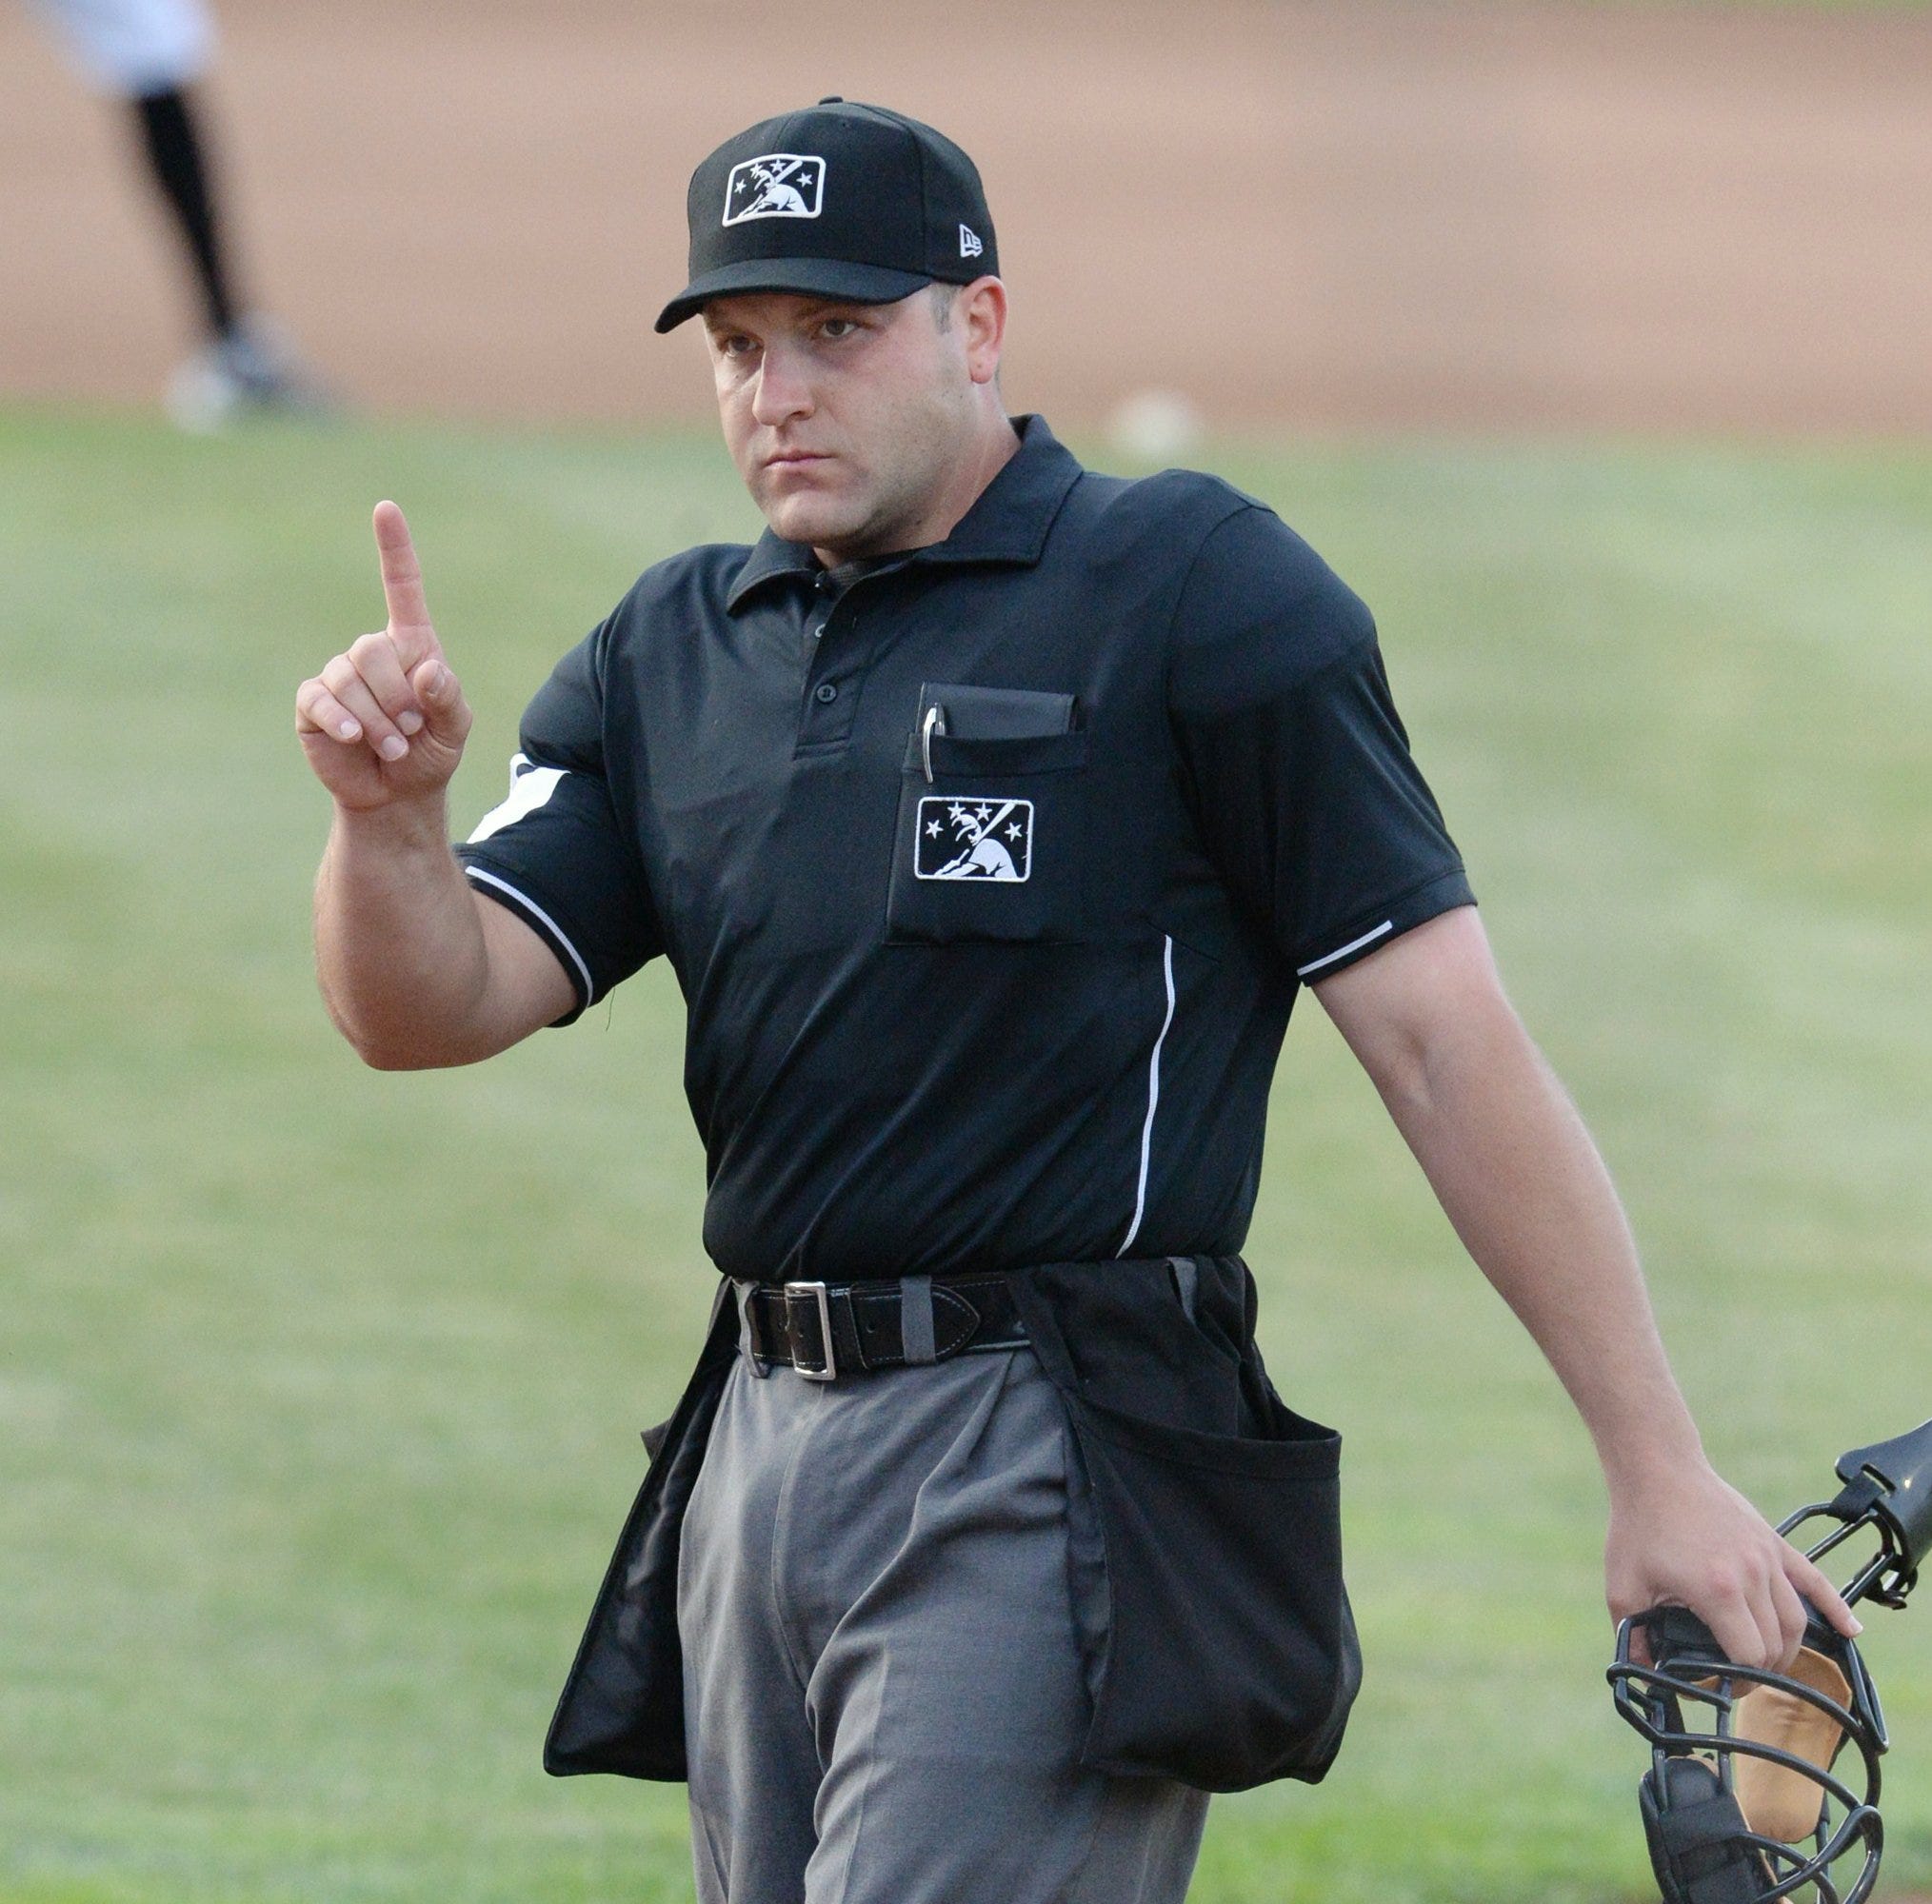 Former MLB Ump shares insights with Protect the Game trainees  Triple  Crown Baseball